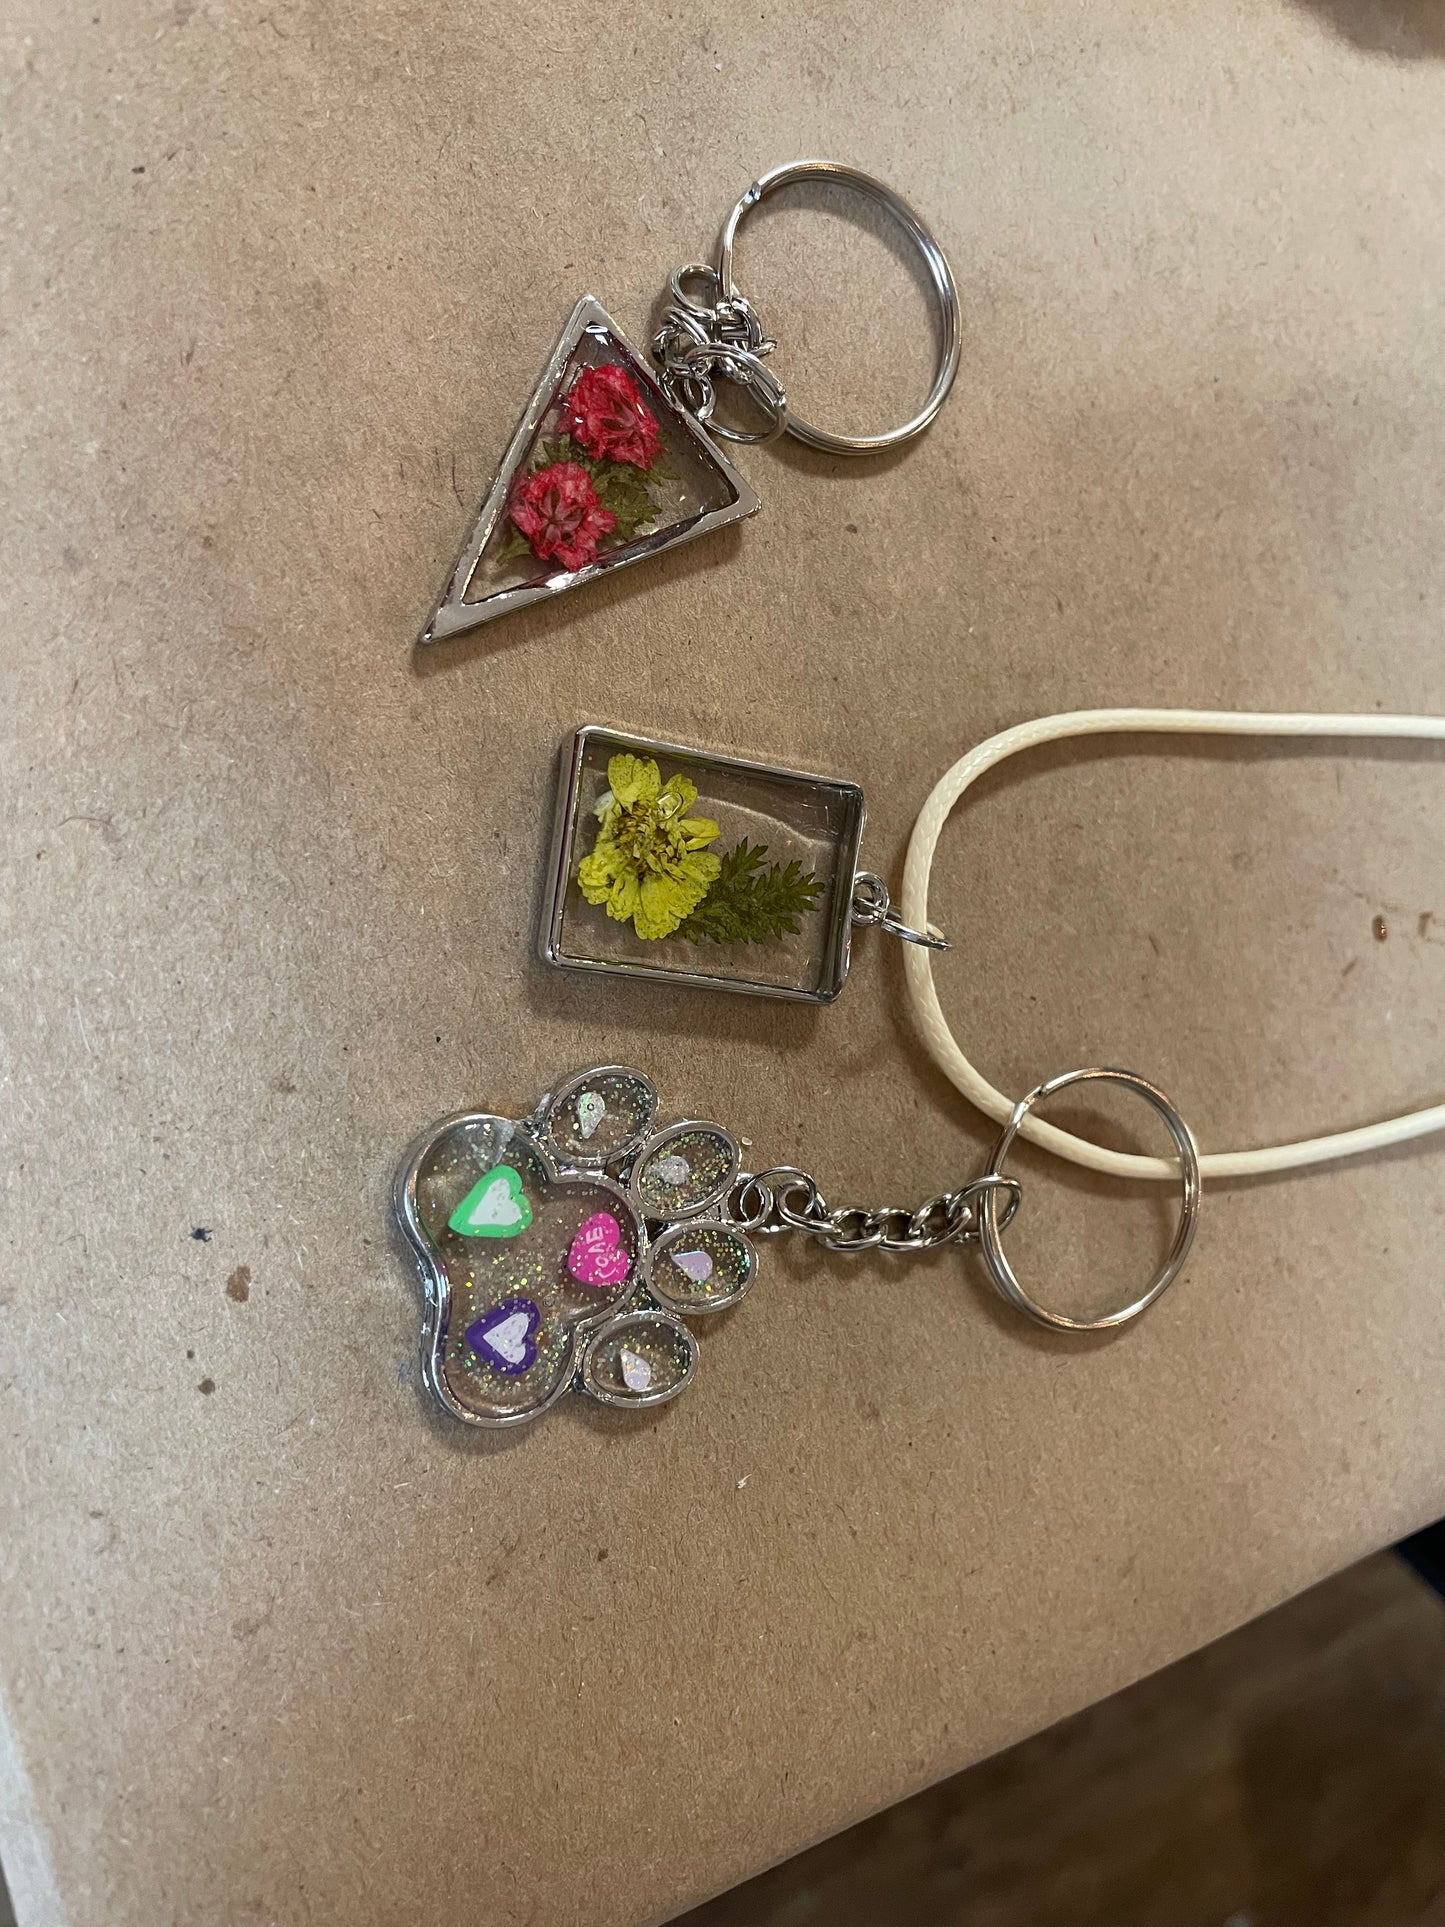 3/22/24 at 6pm Resin Necklaces, Resin Key Chains, and Hydro Dipping Workshop